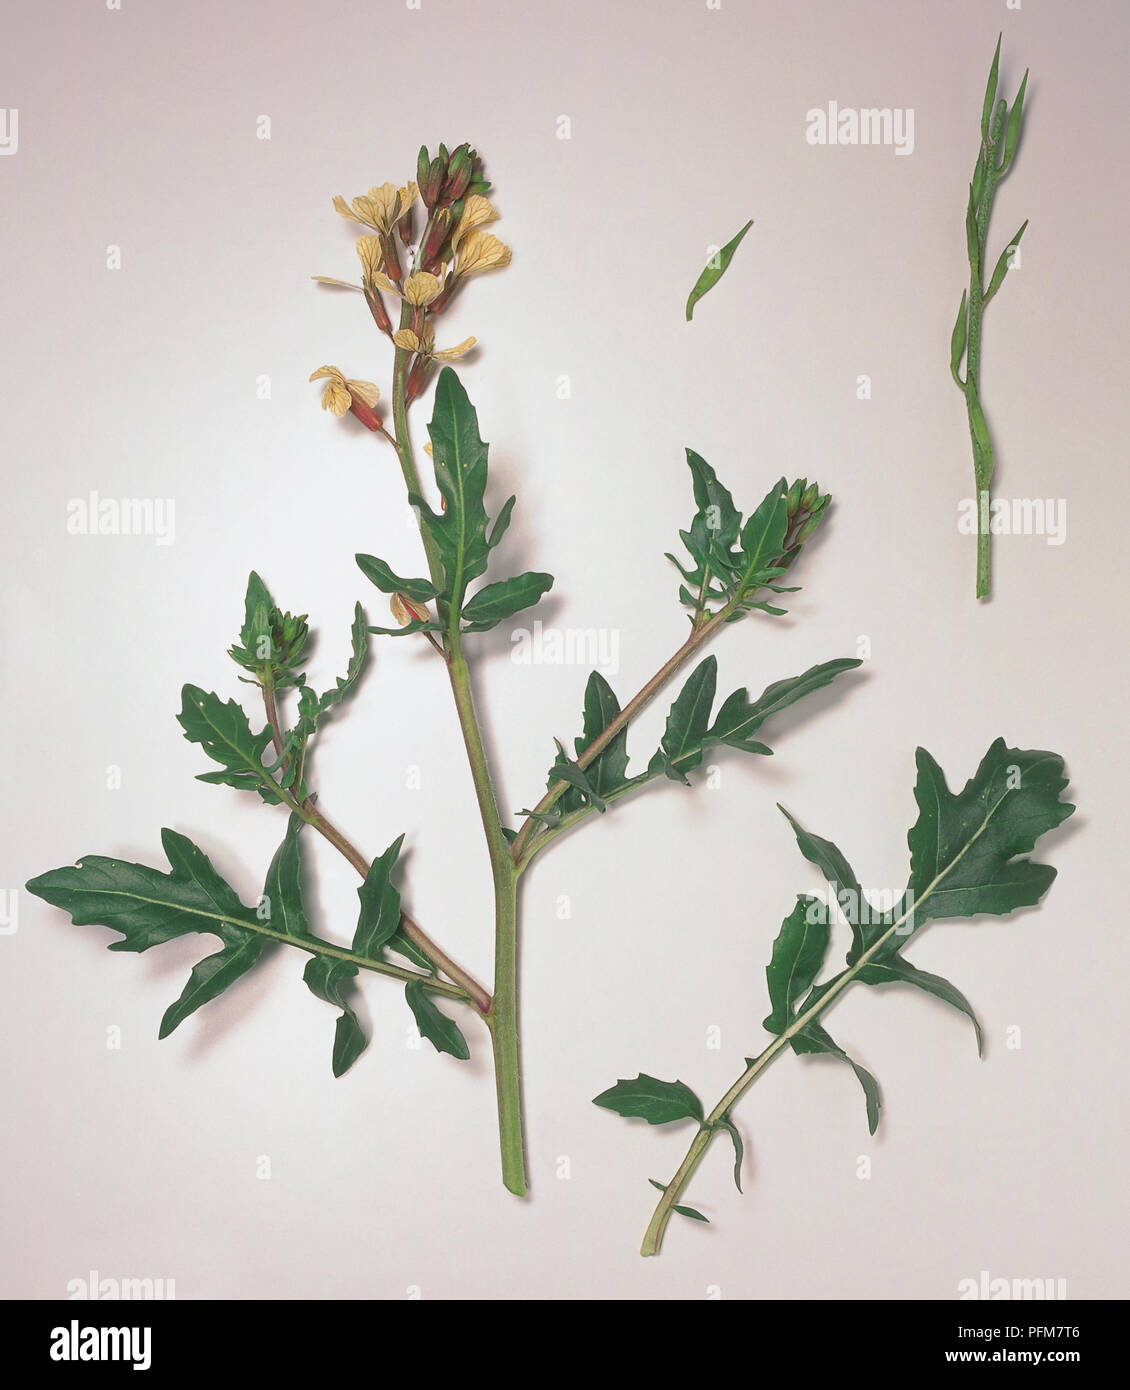 Eruca vesicaria, rocket branch with leafy green branch and pale yellow flowers. Stock Photo